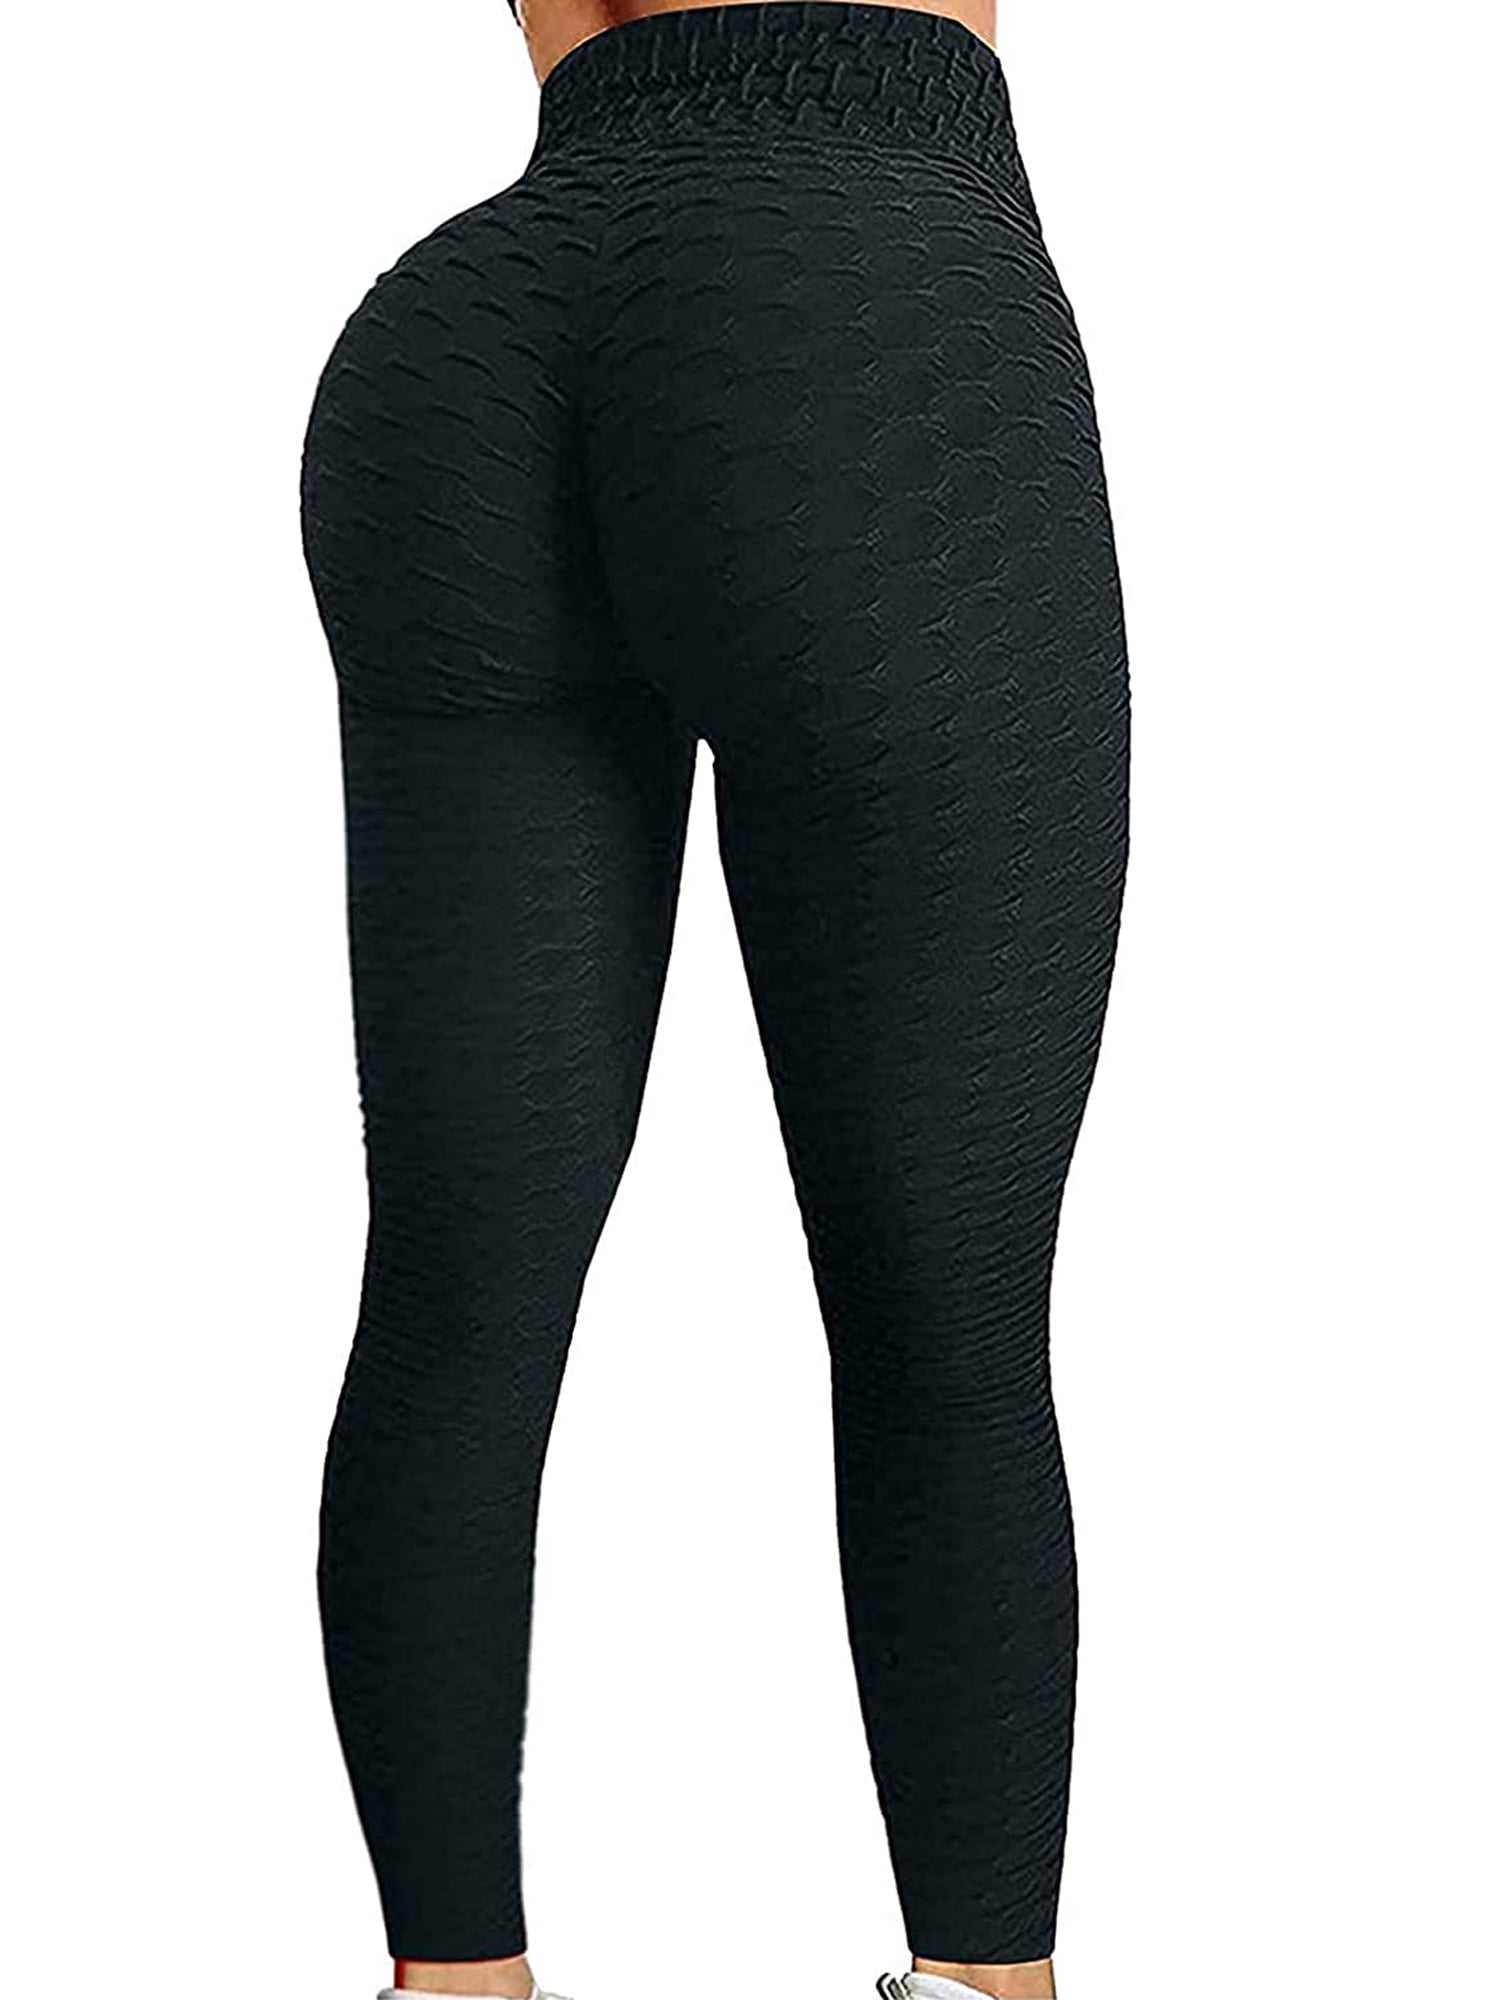 Canrulo Women Booty Legging Yoga Pants Bubble Butt Lifting Workout Tights  Black M